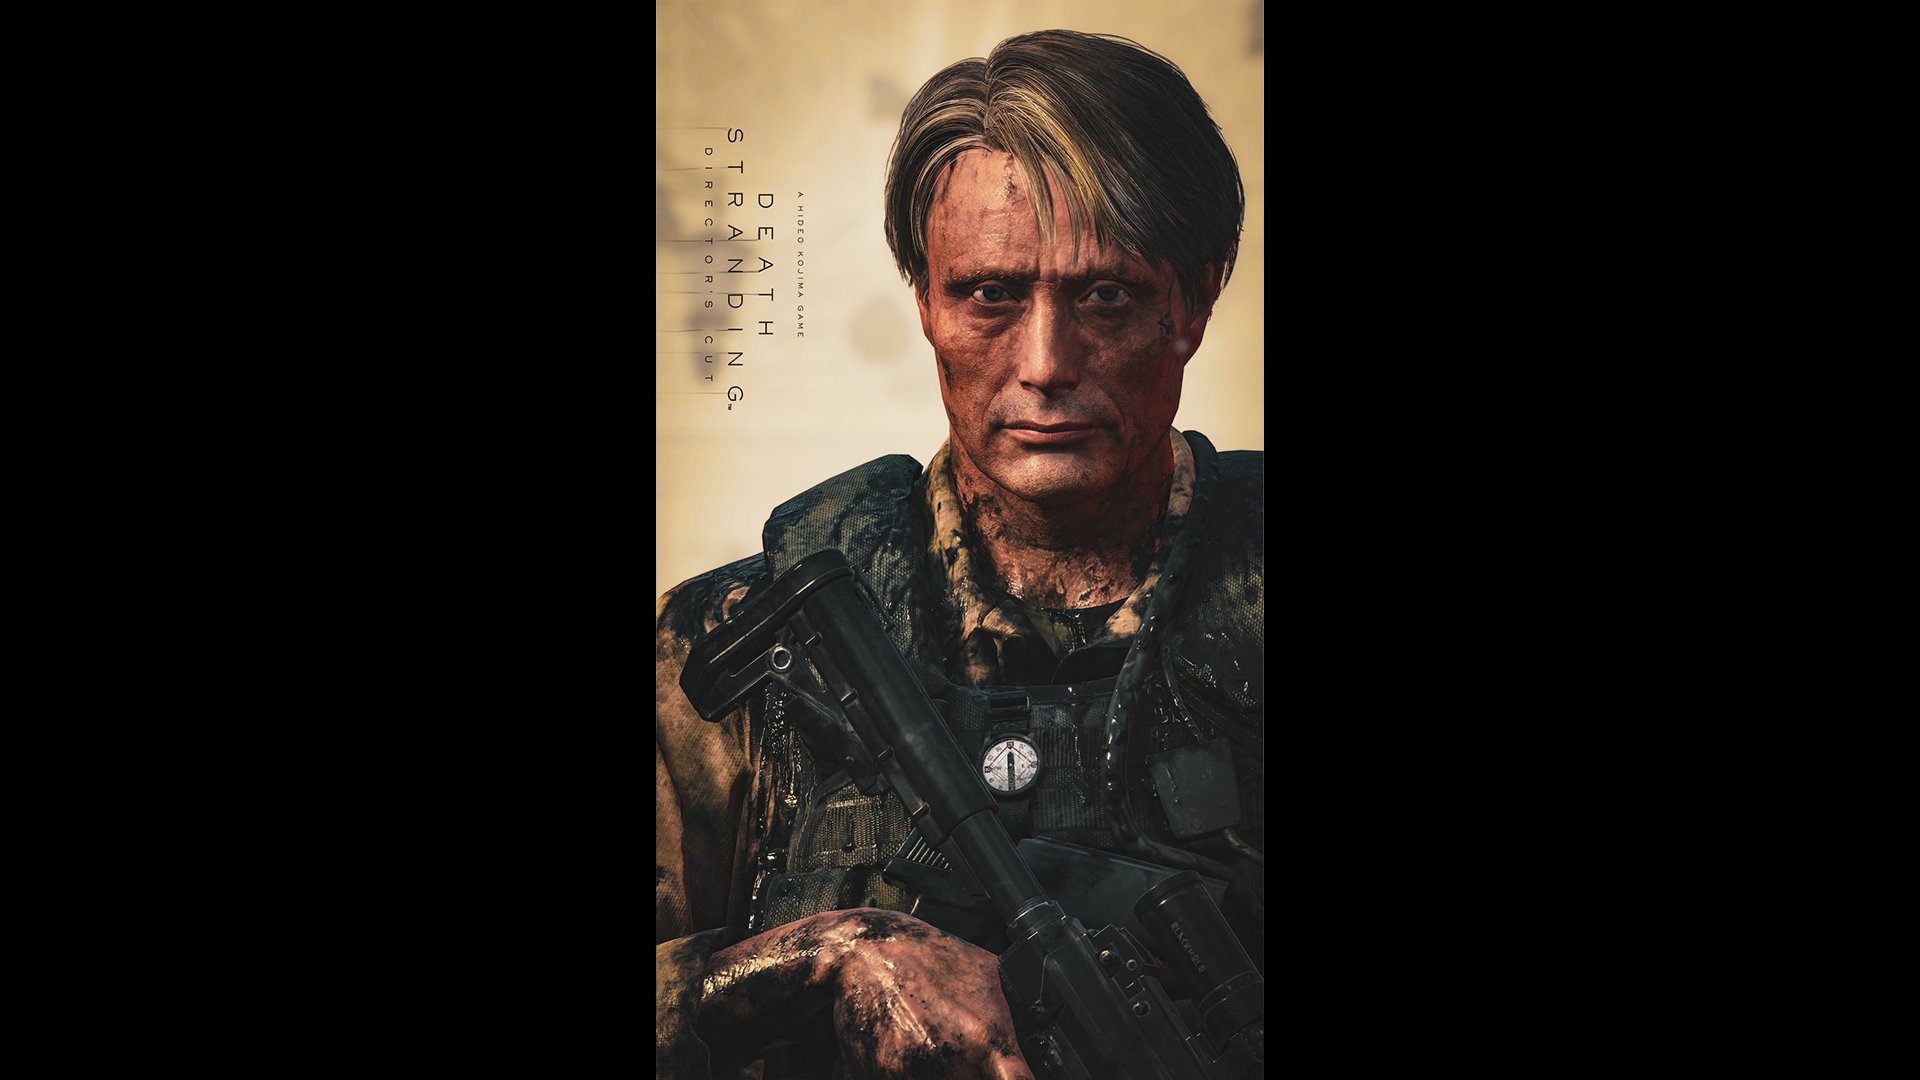 Death Stranding: Director's Cut] #66 A game so fantastic I did the